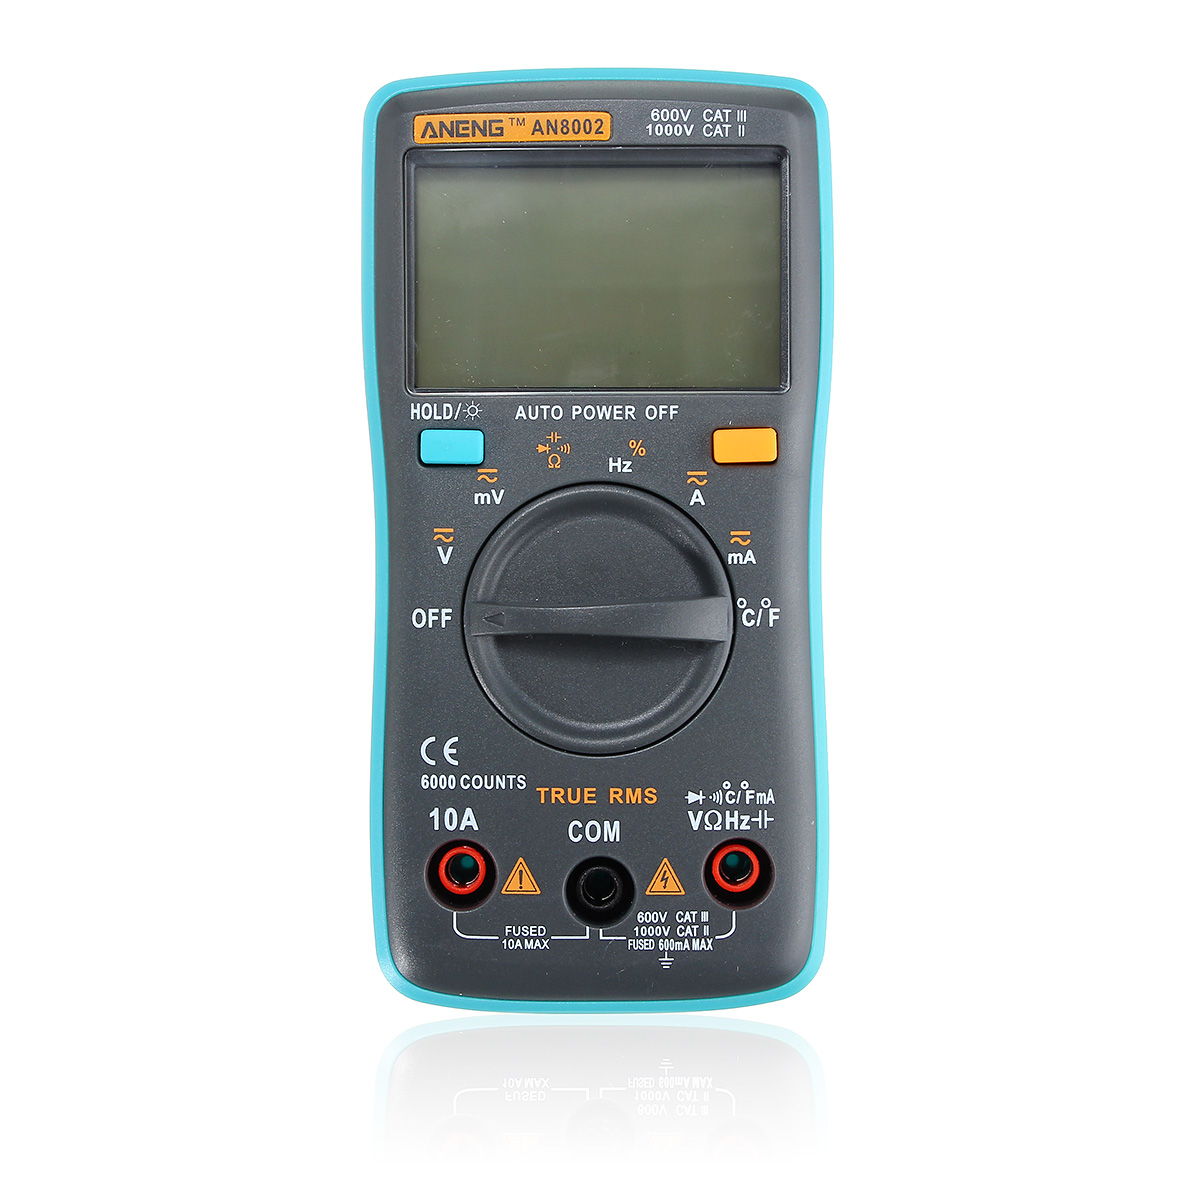 ANENG AN8002 Digital True RMS 6000 Counts Multimeter AC/DC Current Voltage Frequency Resistance Temperature Tester ℃/℉ 160